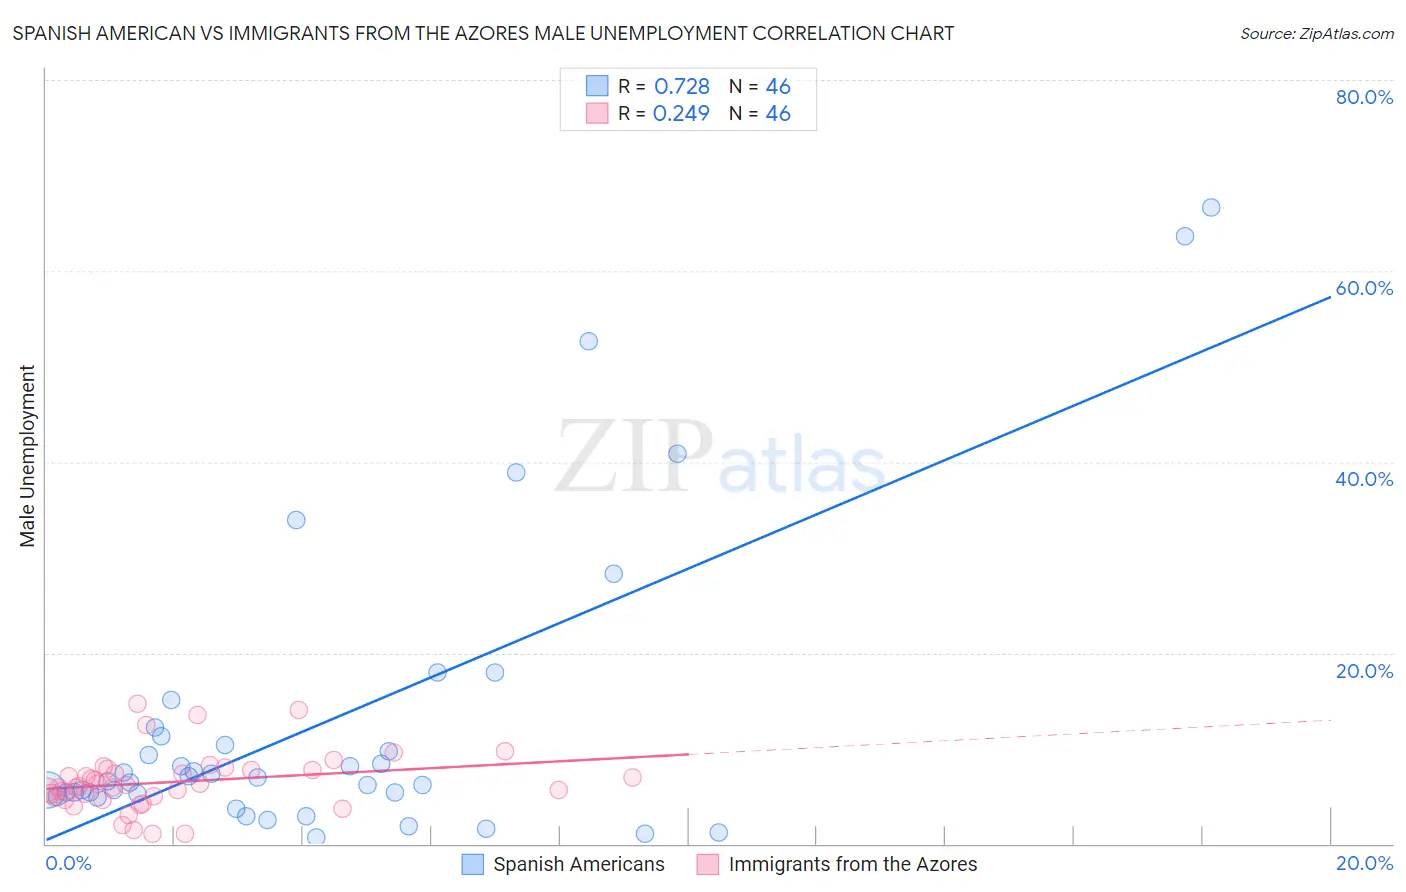 Spanish American vs Immigrants from the Azores Male Unemployment